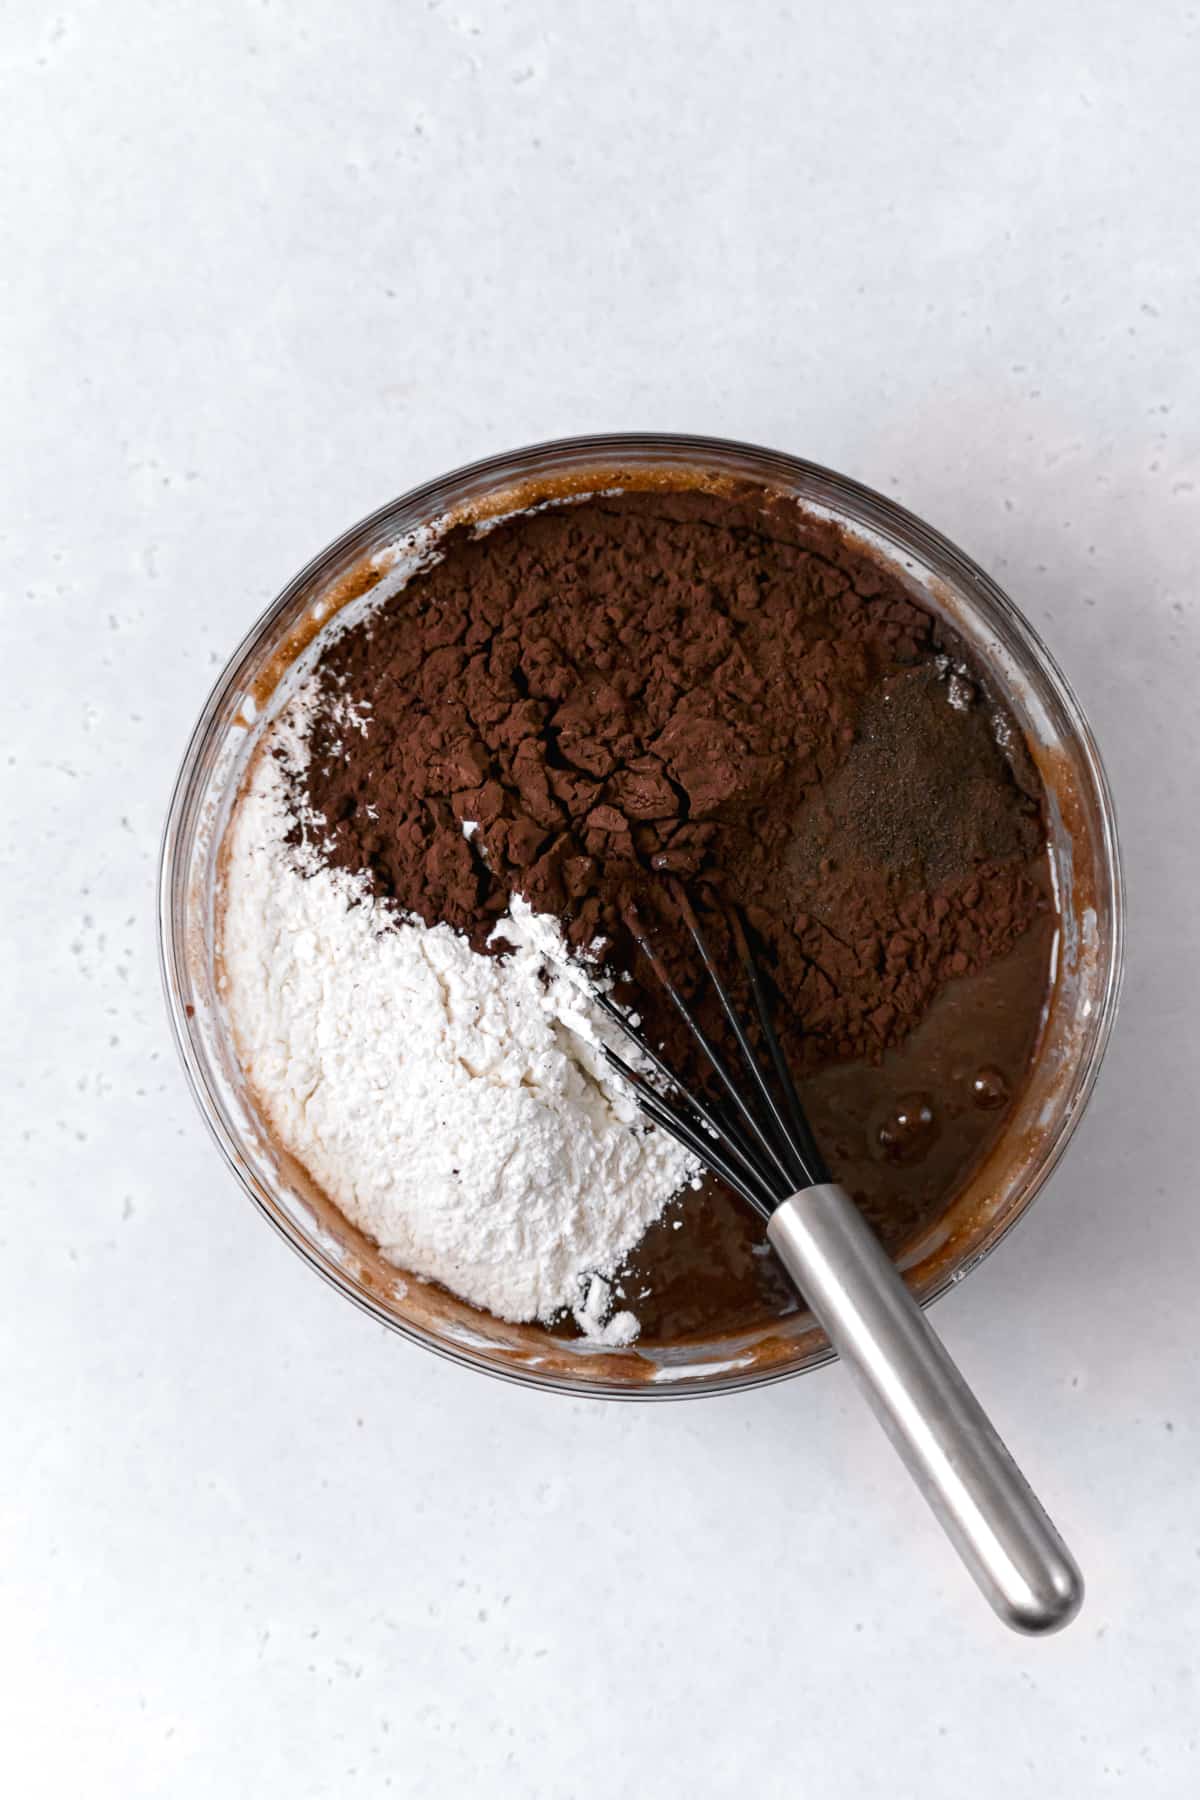 flour, dutch process cocoa powder, and espresso powder on top of wet ingredients in glass bowl.